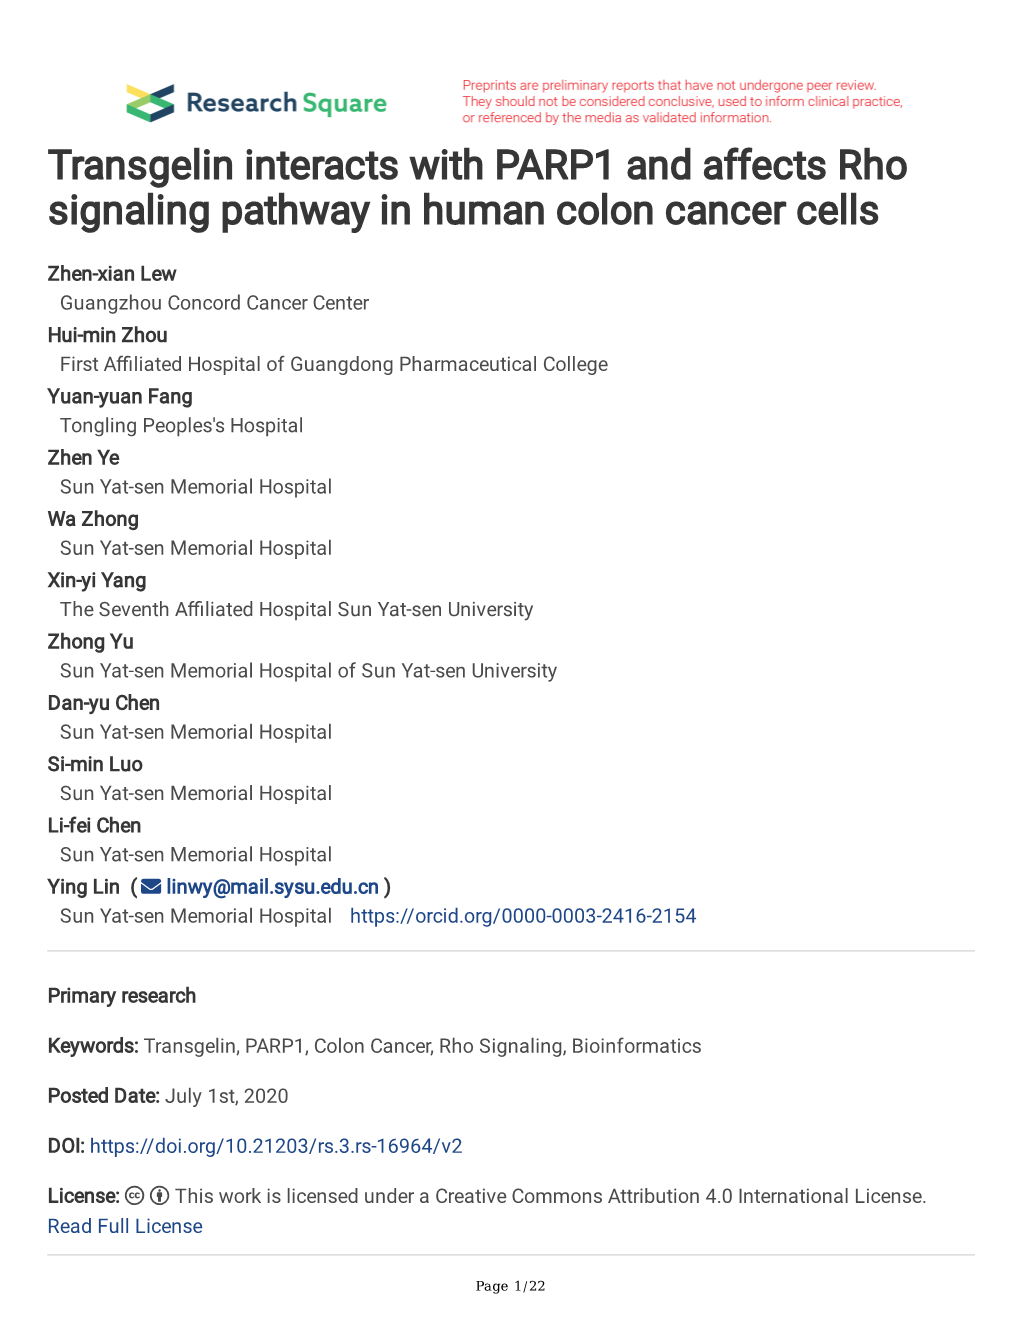 Transgelin Interacts with PARP1 and Affects Rho Signaling Pathway in Human Colon Cancer Cells